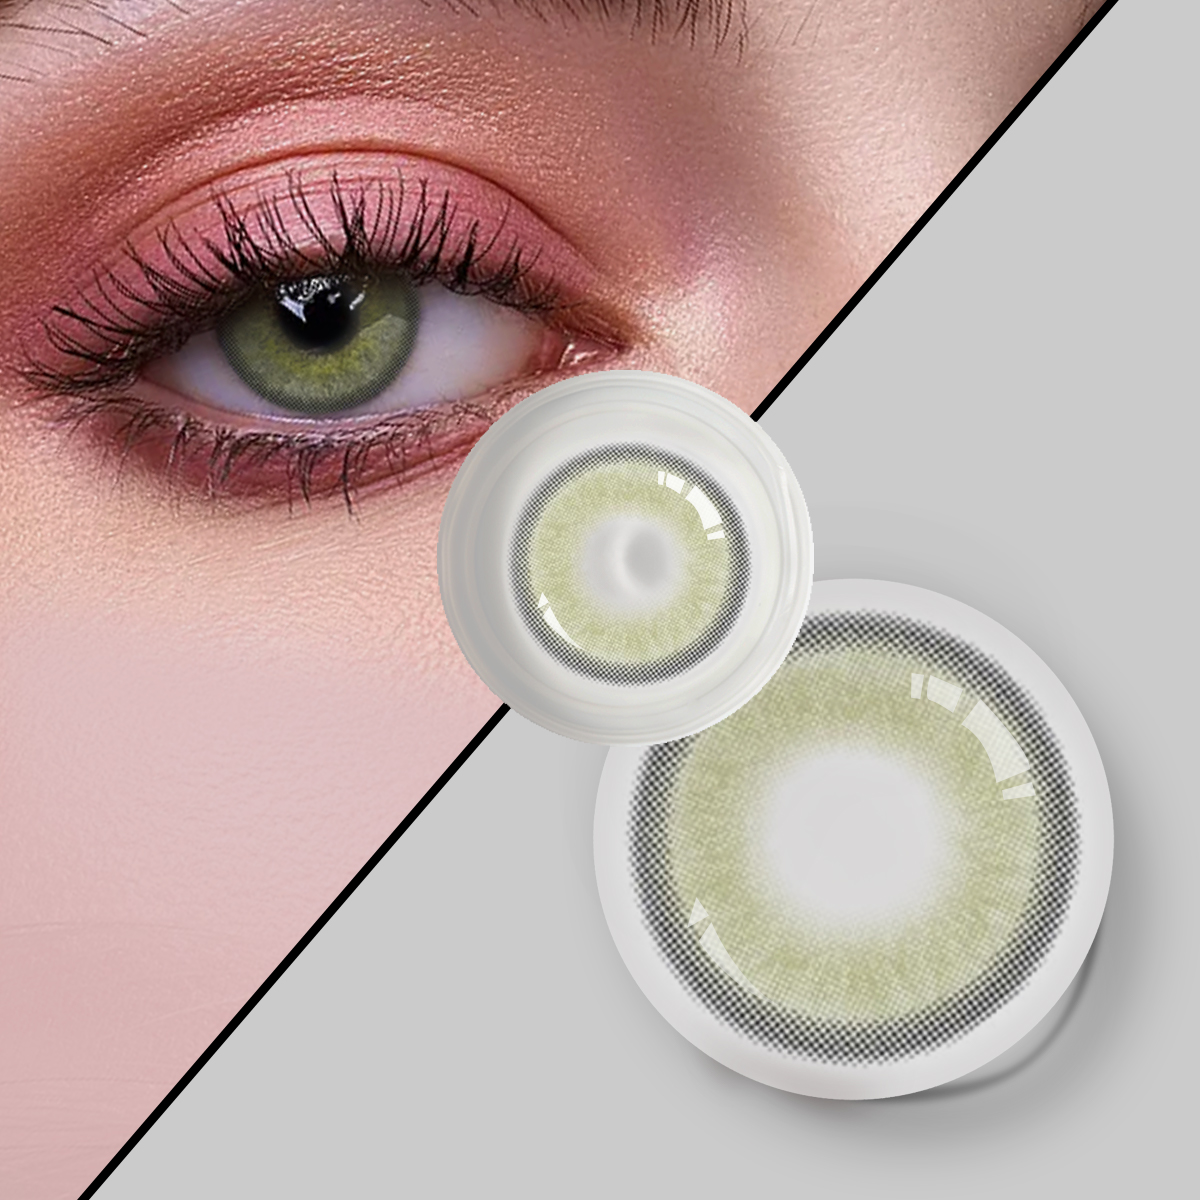 New Arrival Hot Selling Wholesale yellow oem cheap 1 year color contact lenses